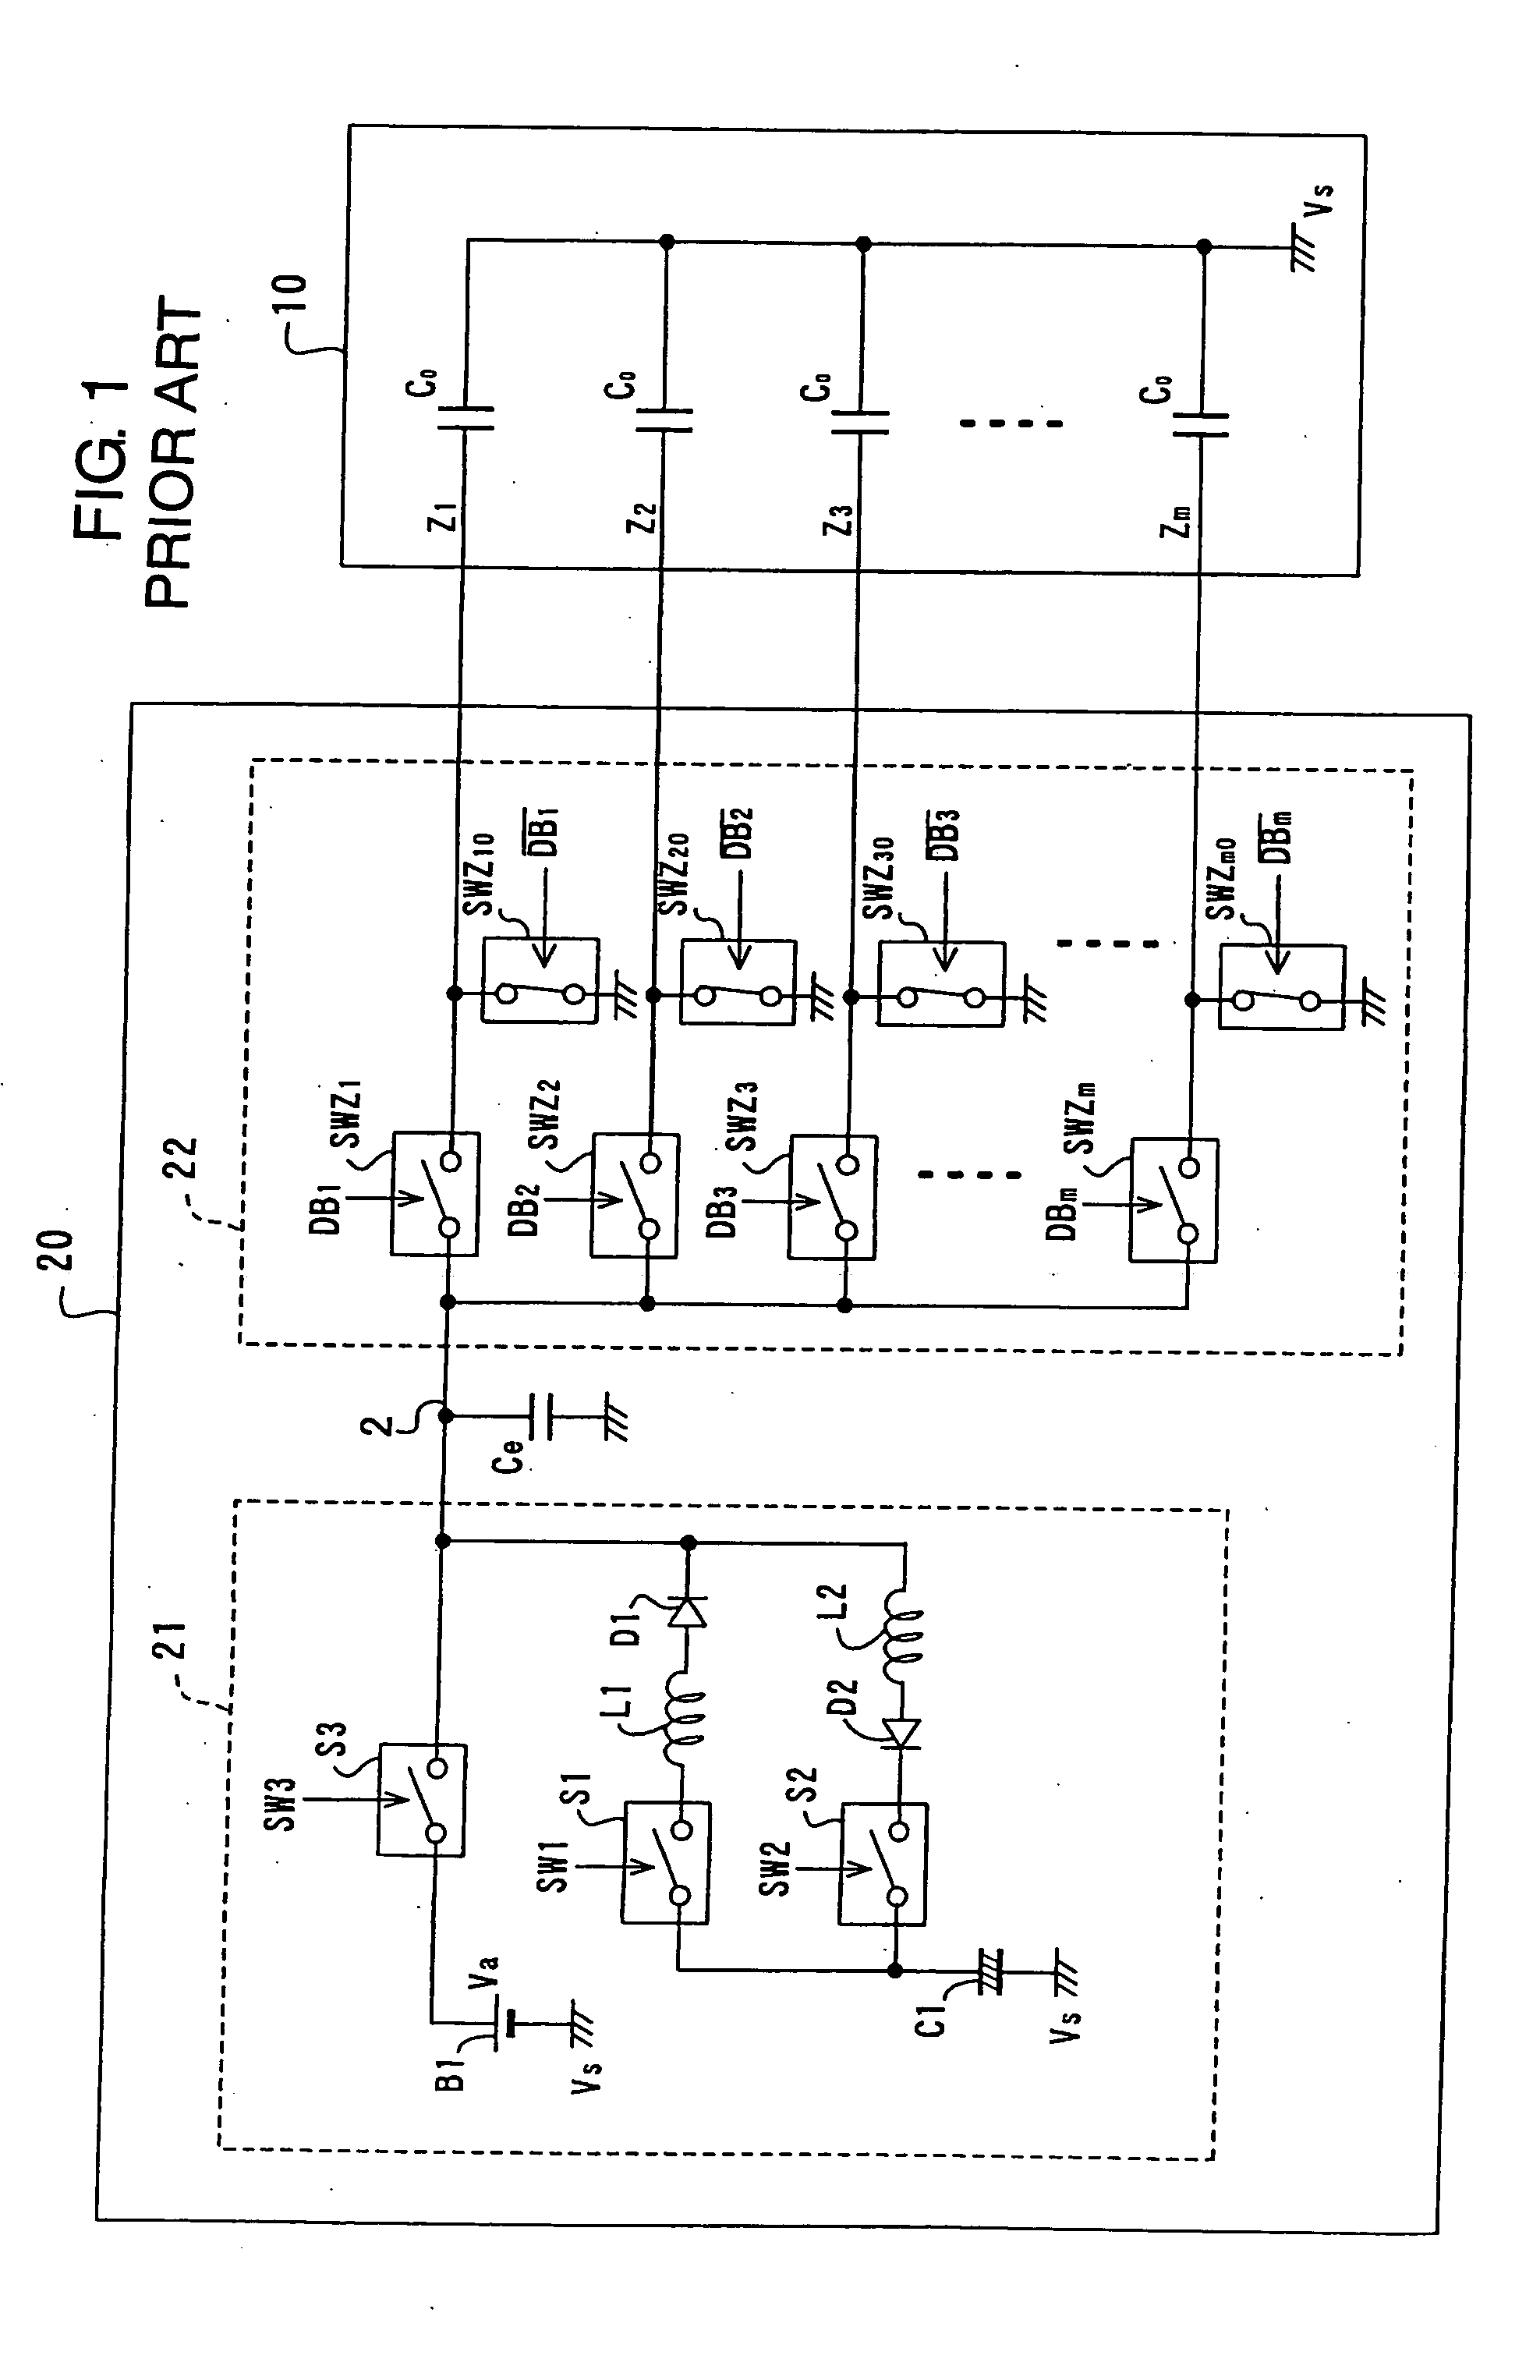 Driver device for driving capacitive light emitting elements